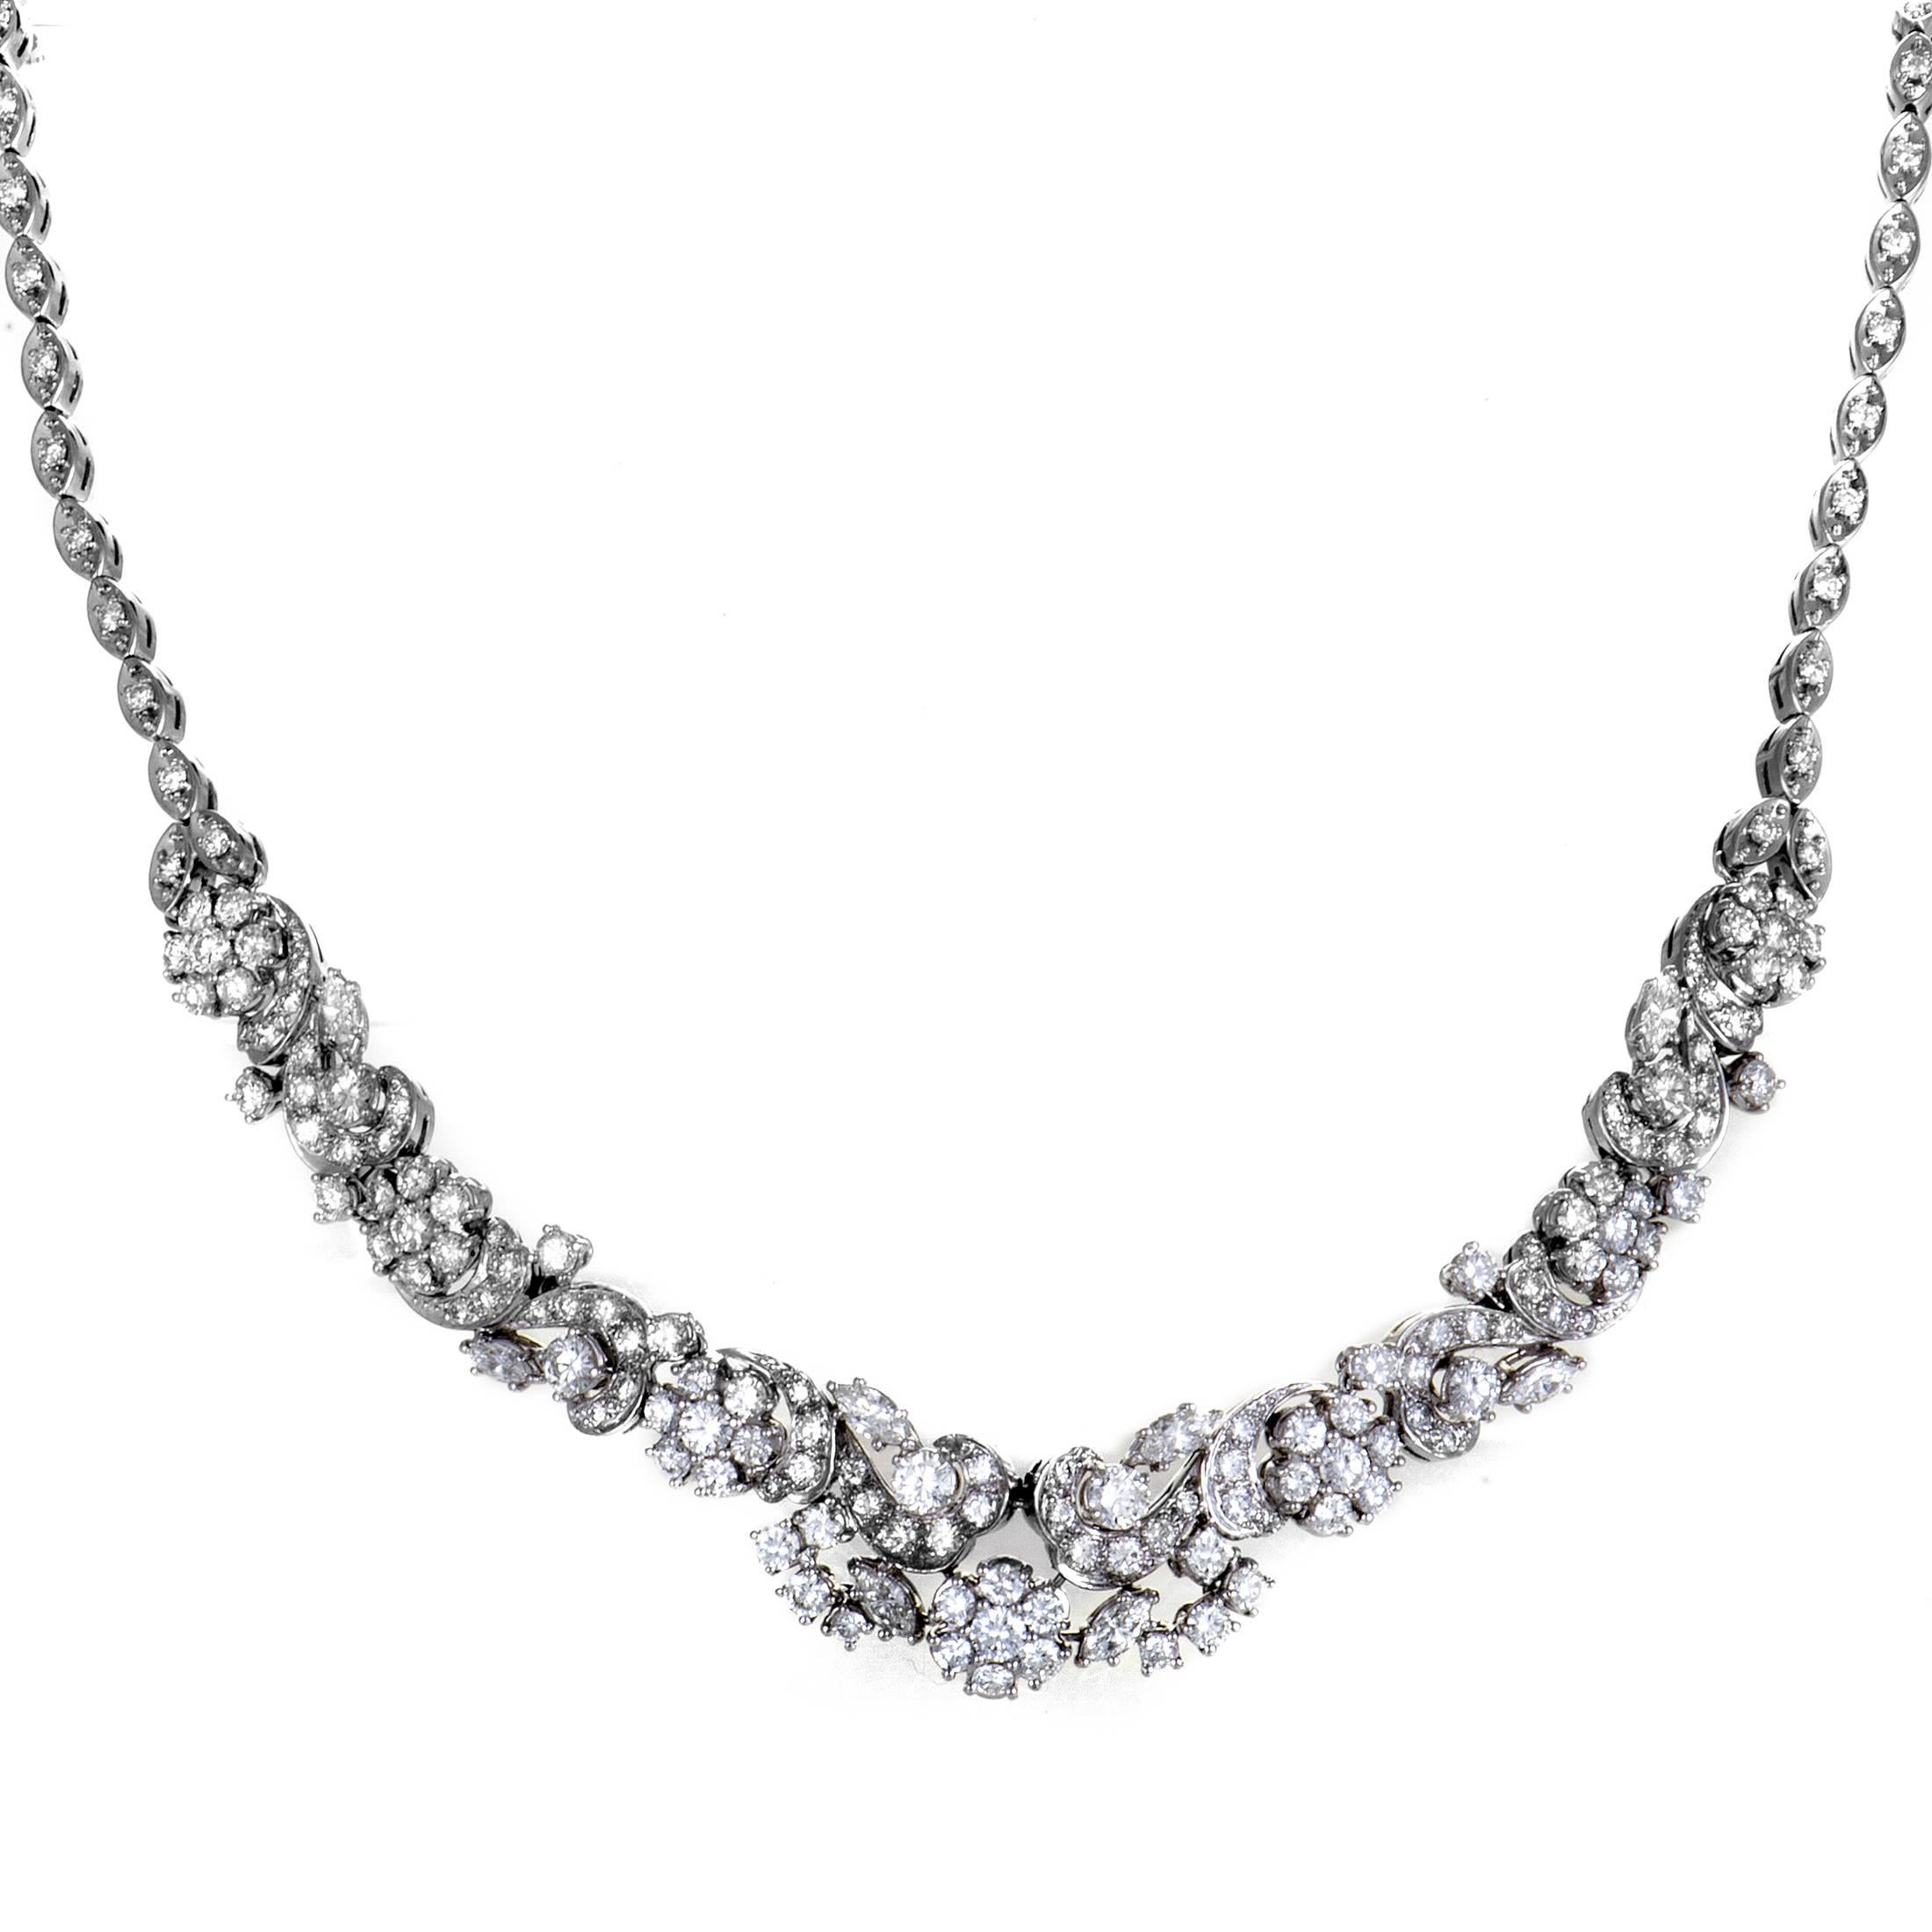 Full Diamond Pave and Platinum Floral Collar Necklace